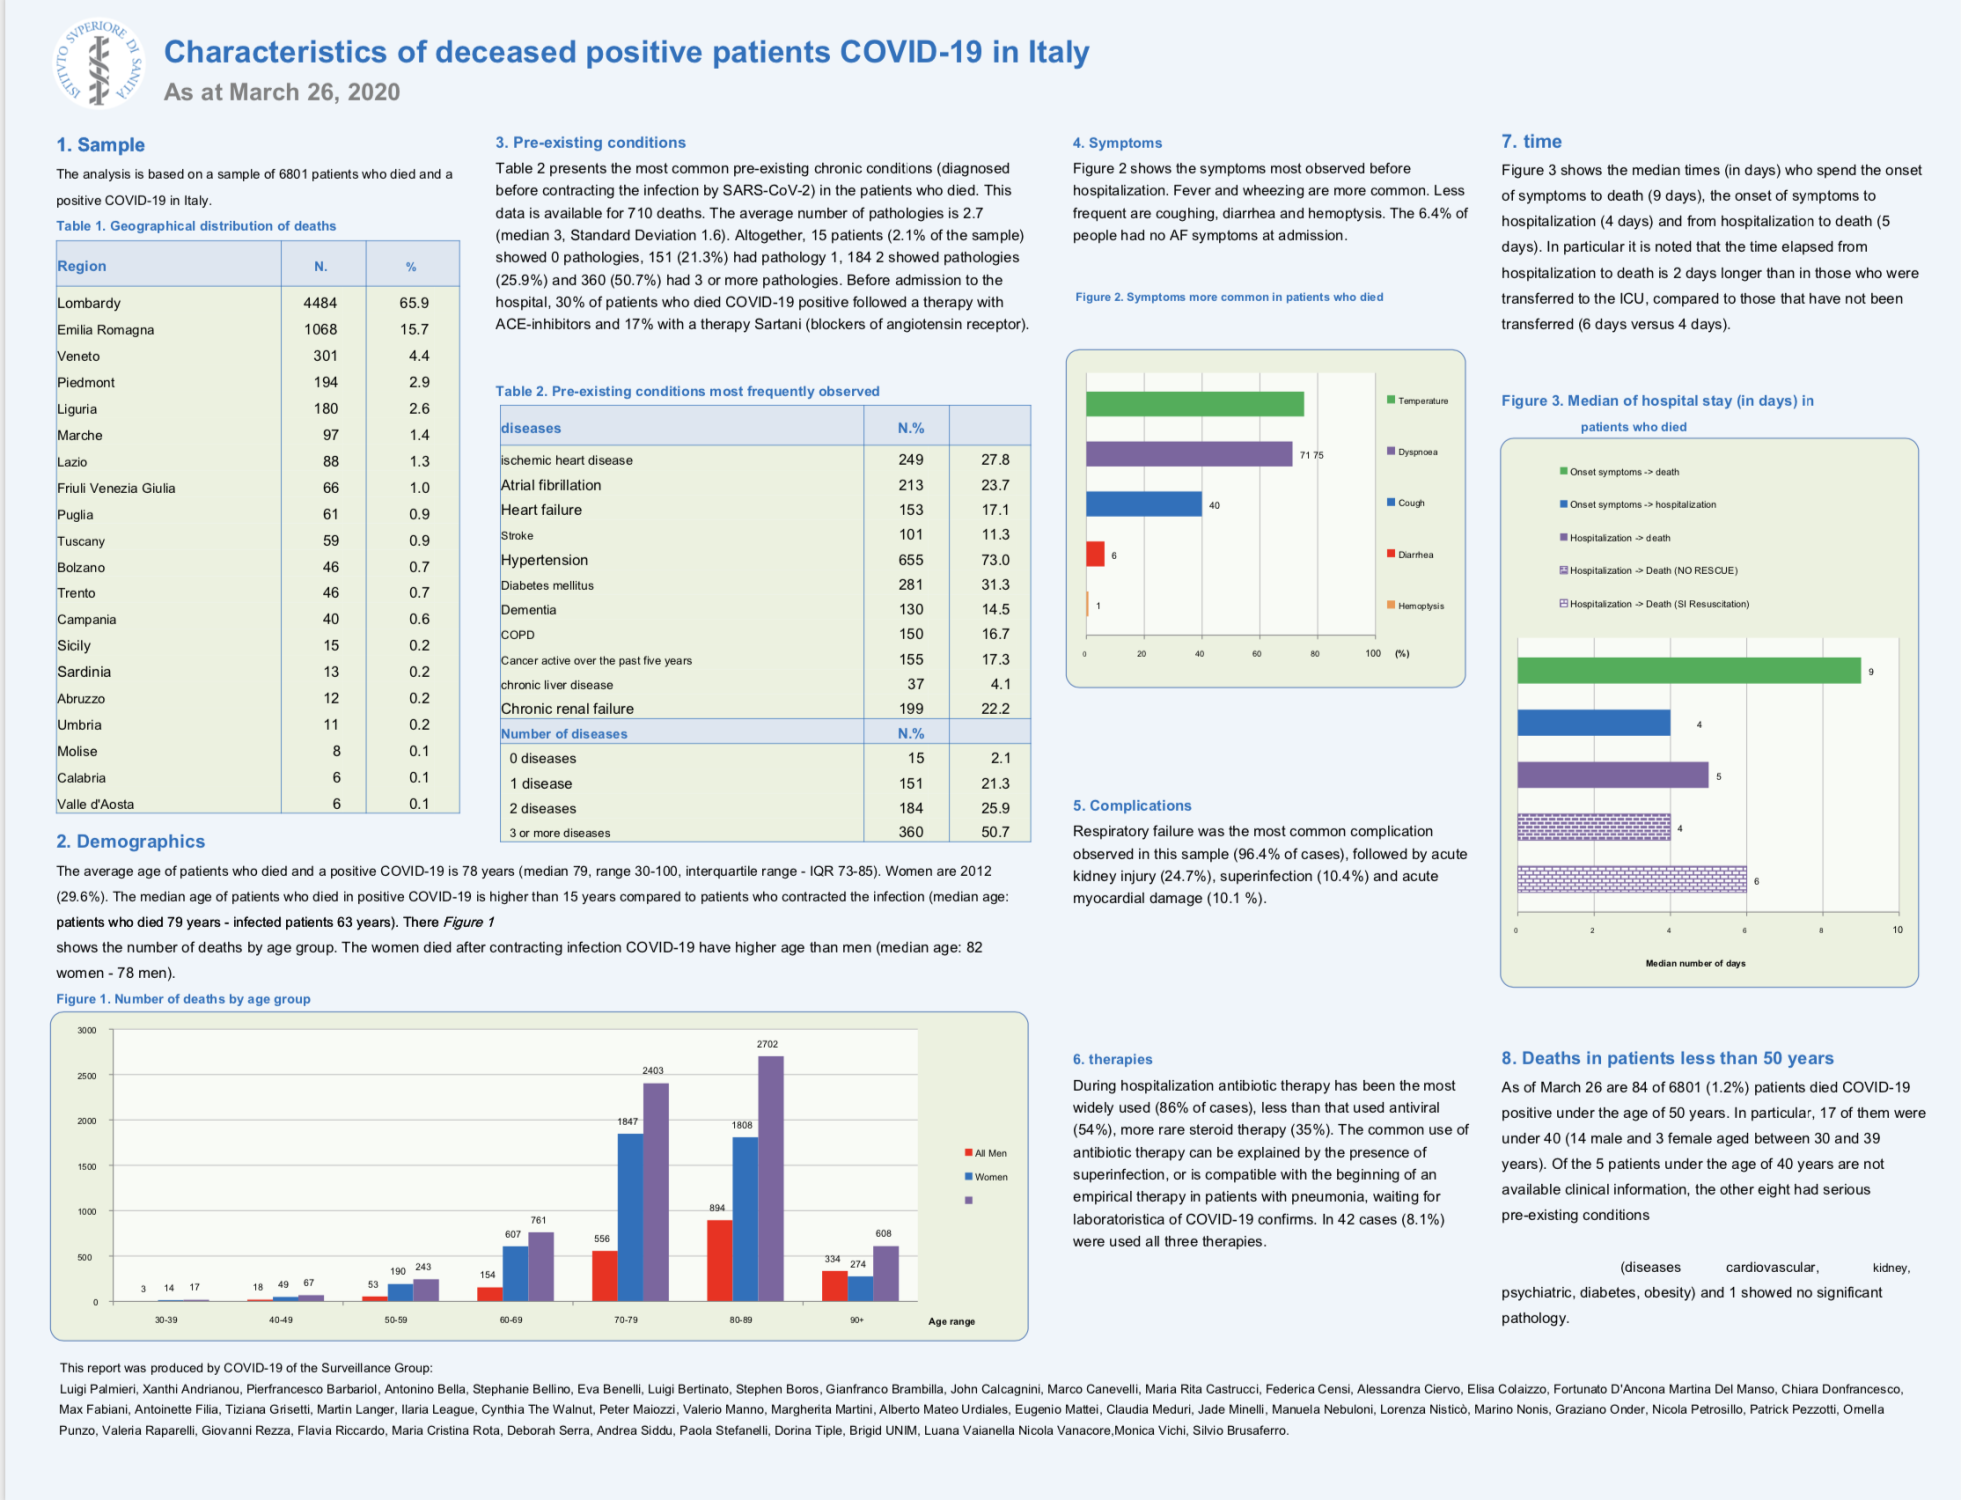 Chart depicting the characteristics of deceased positive COVID-19 patients in Italy